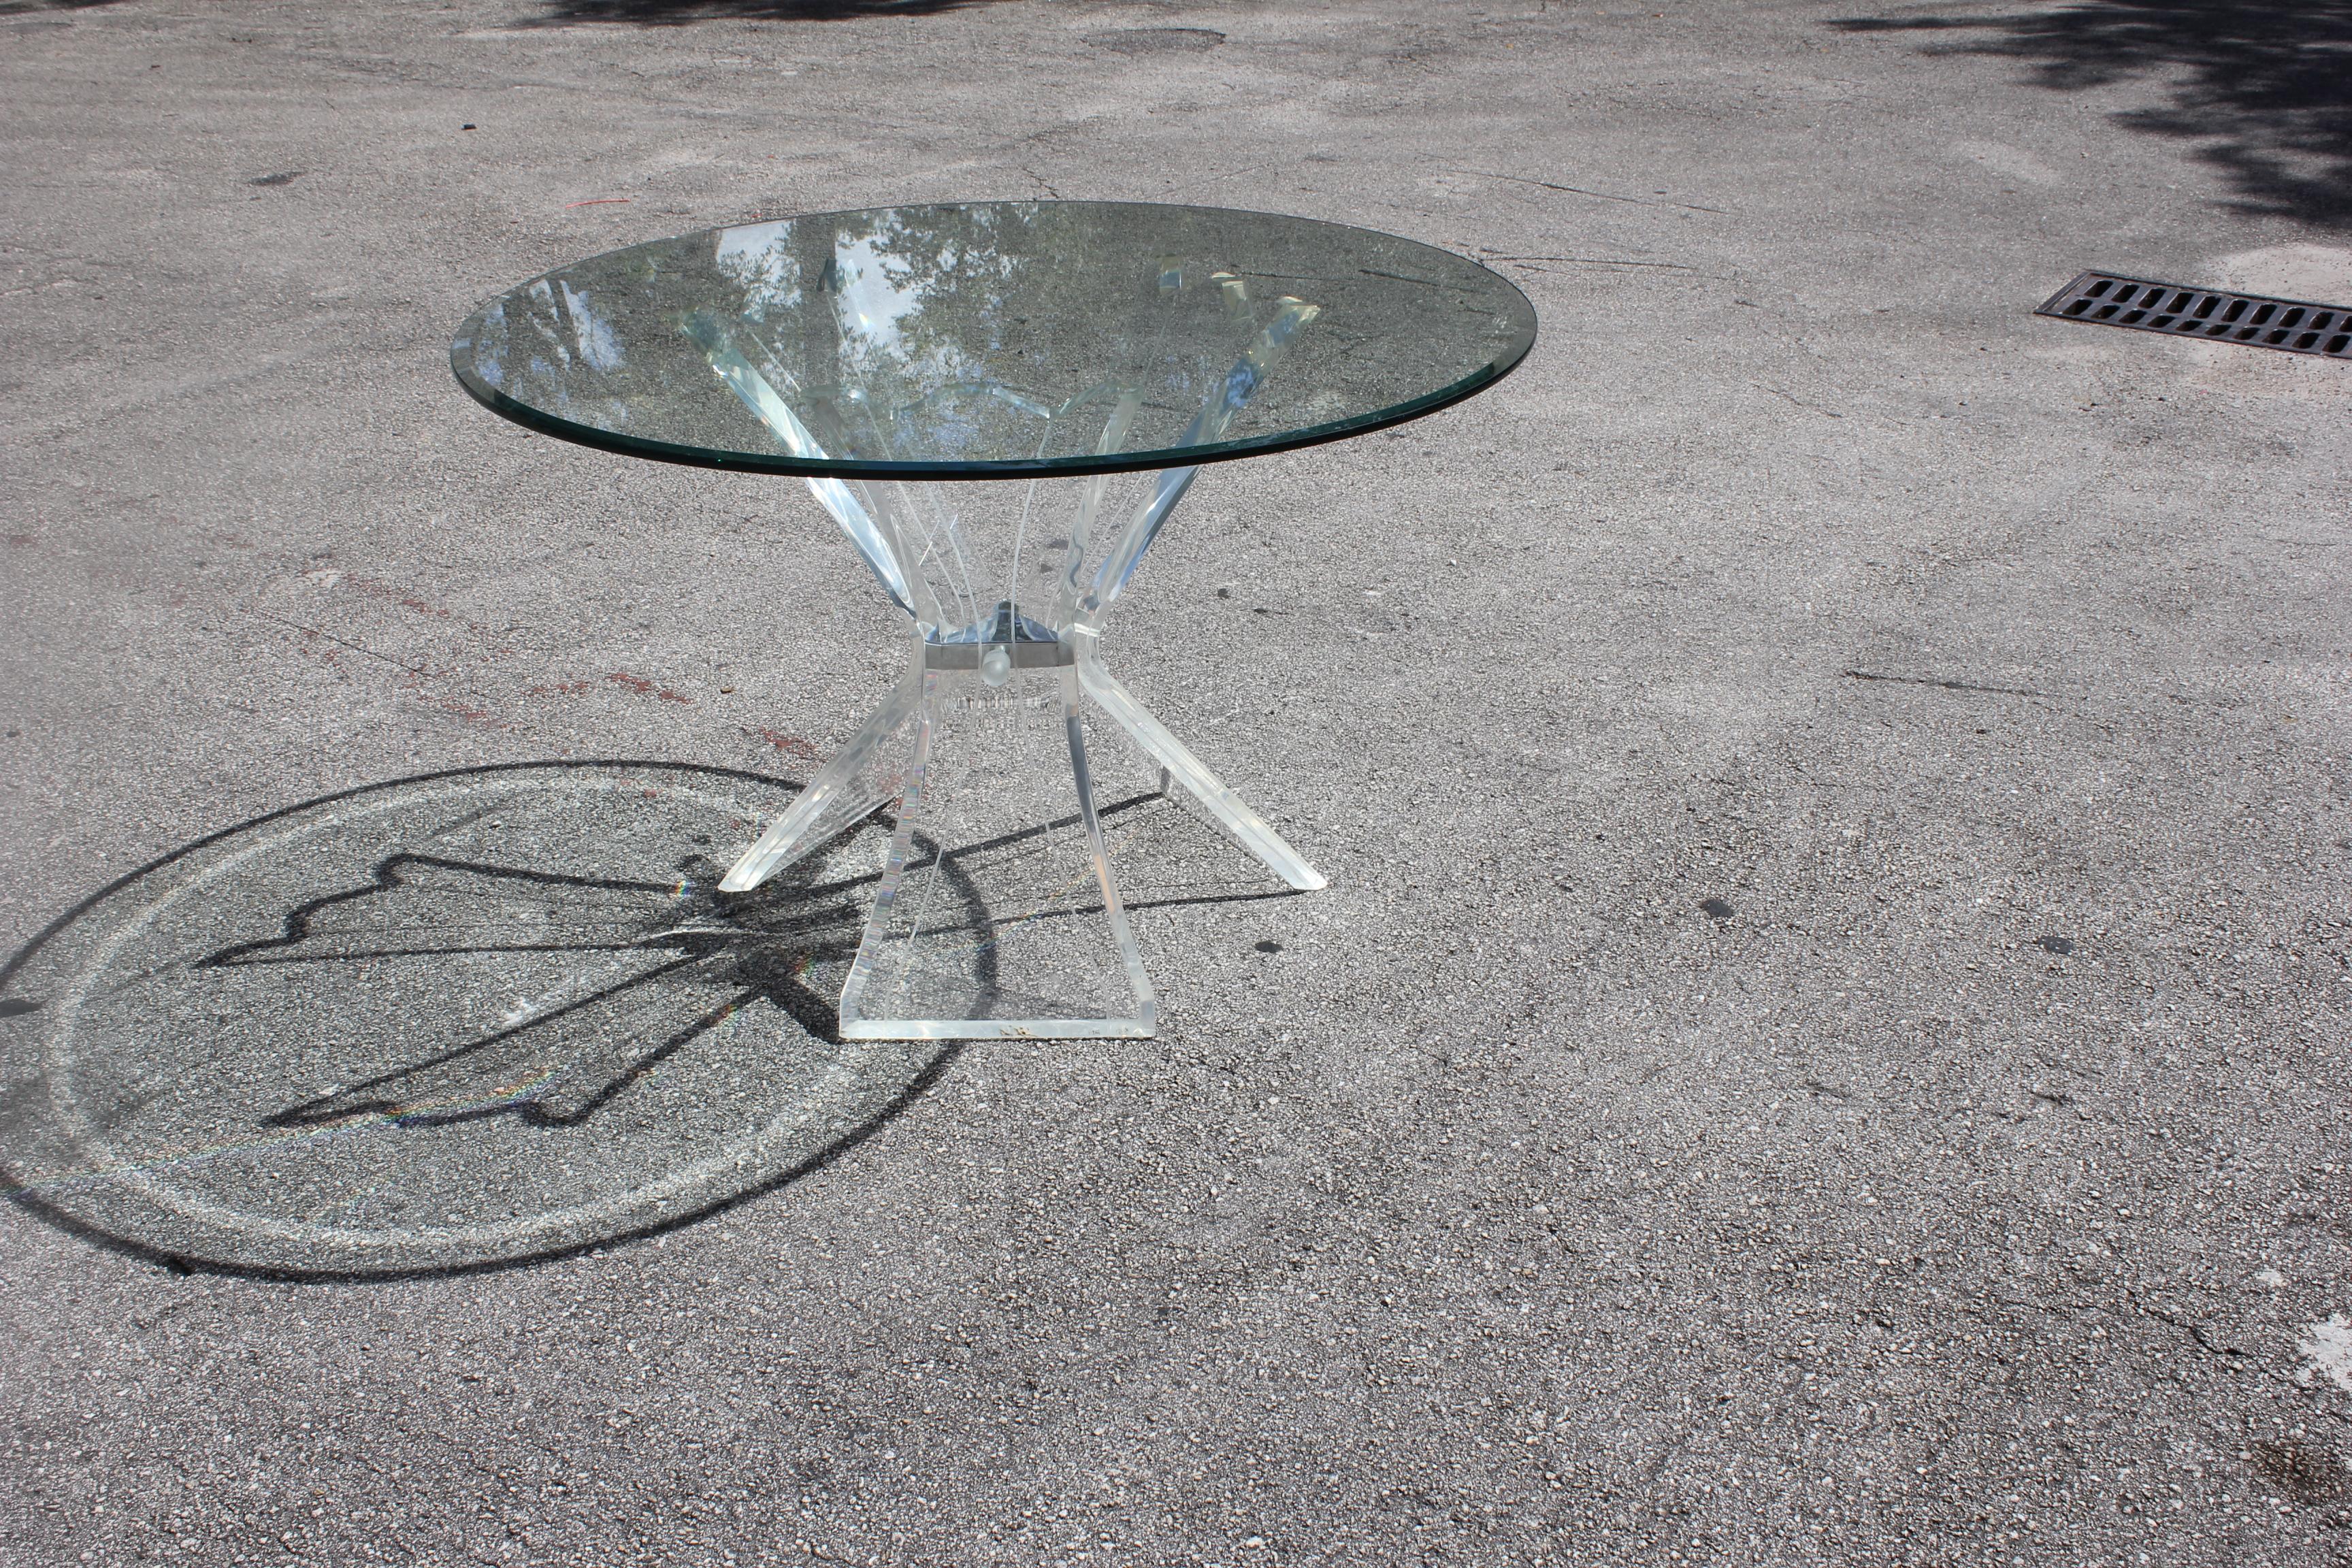 Vintage Mid-Century Modern triple butterfly Lucite dining table or centre table glass top
Beautifully bead blasted to simulate the look of ICE that highlights a unique style, also in the centre it has a triangular piece of Lucite with glass mirror